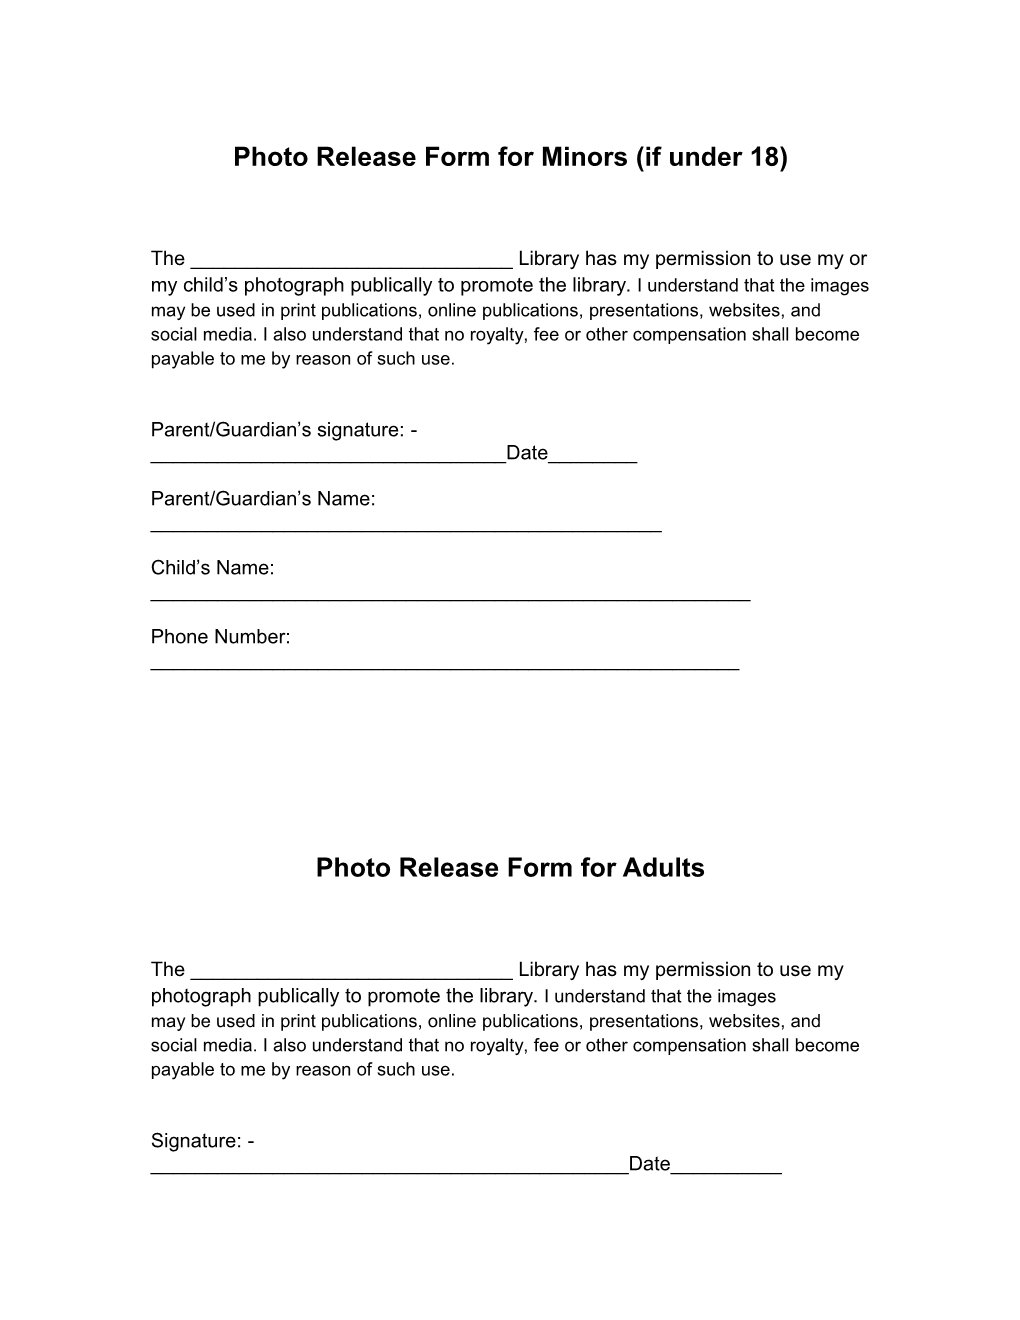 Photo Release Form For Minors & Photo Release Form For Adults